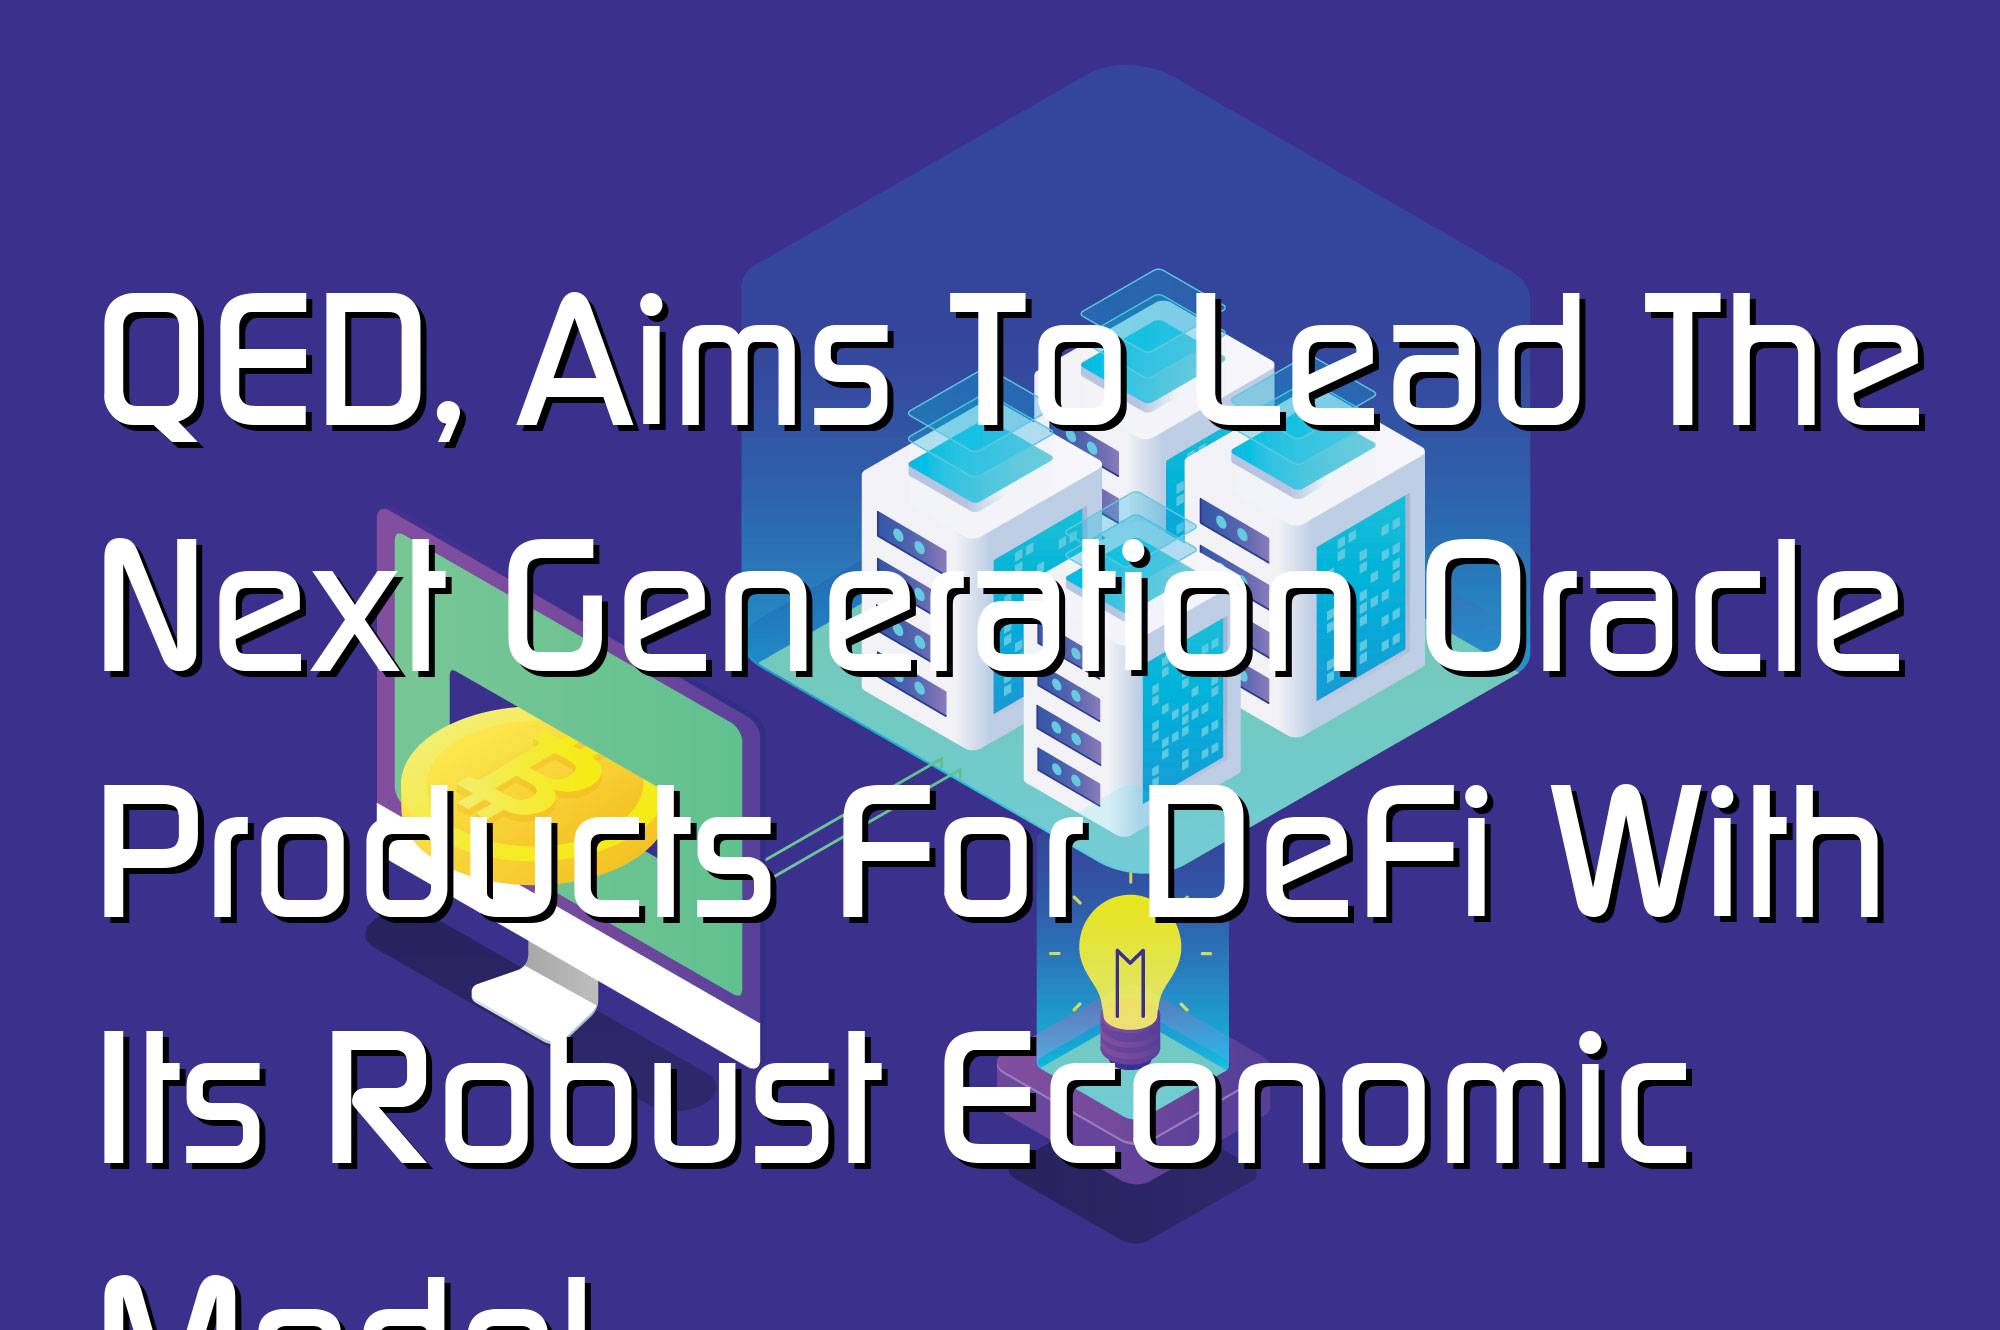 @$62120: QED, Aims To Lead The Next Generation Oracle Products For DeFi With Its Robust Economic Model